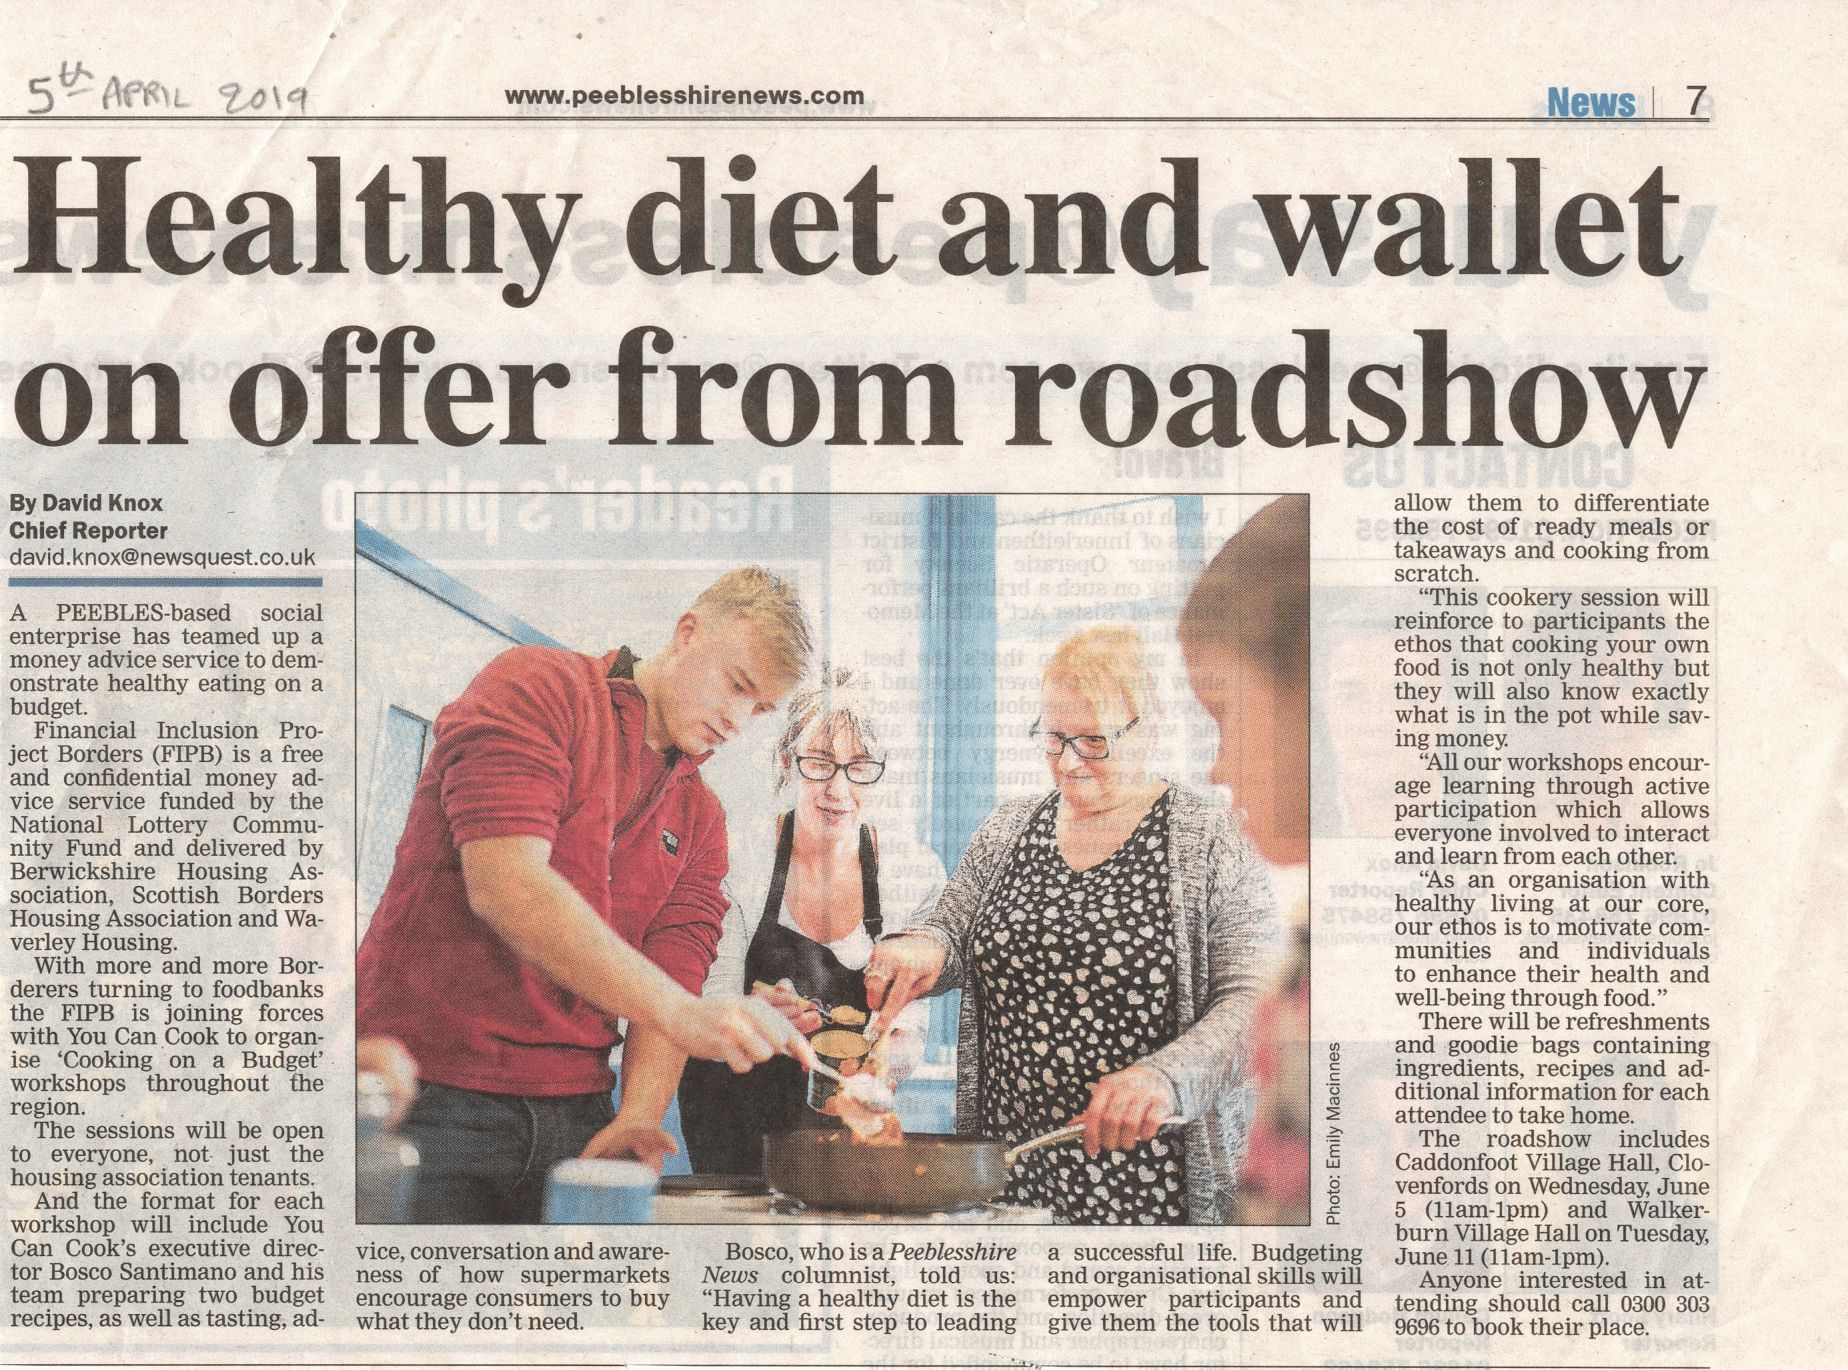 Press Clipping: Healthy diet and wallet on offer from roadshow